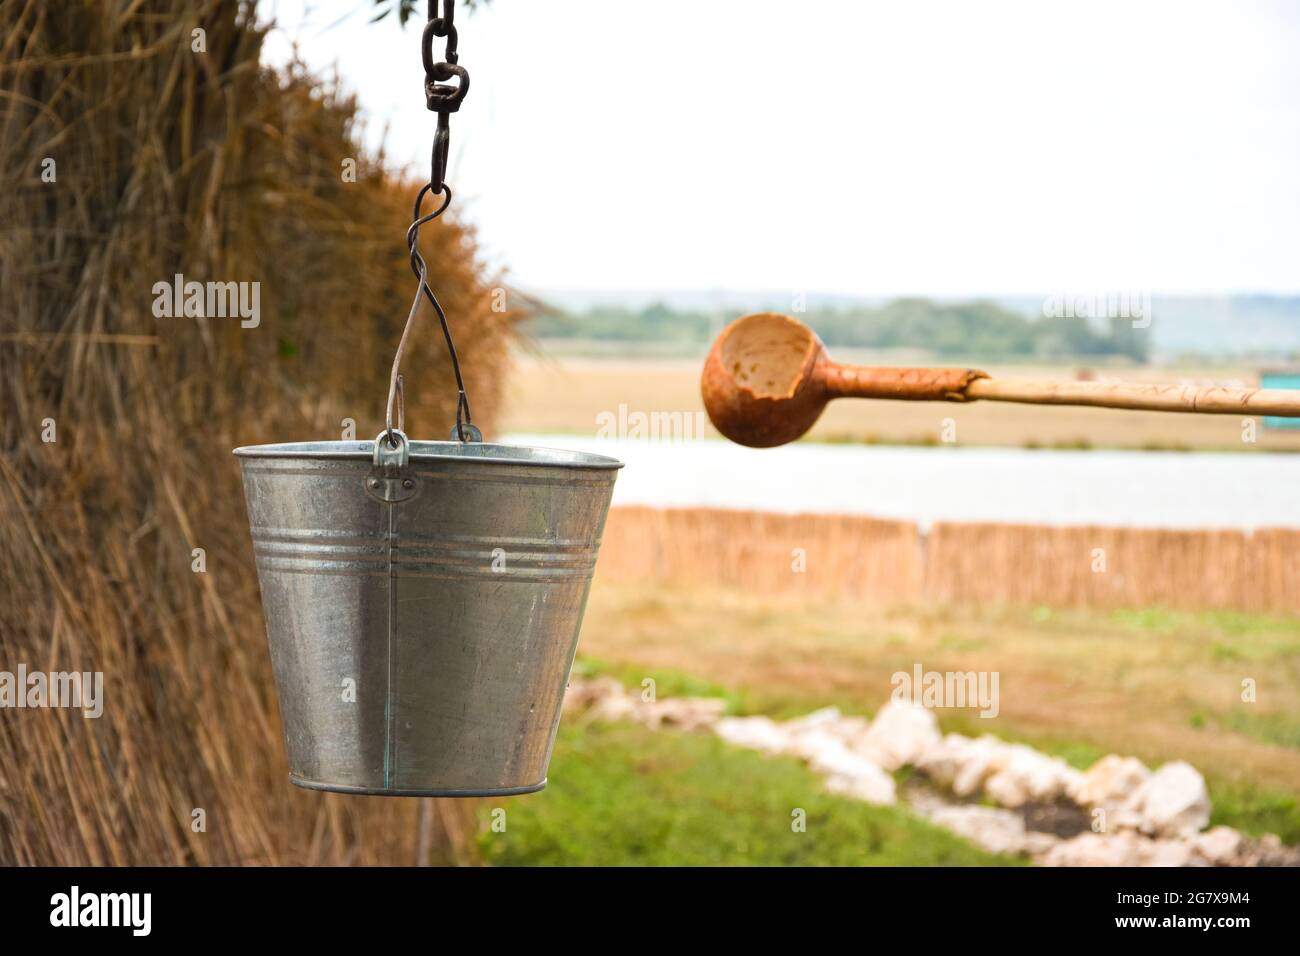 A water fountain with an old bucket and a makeshift mug made of pumpkin. Reed fence in background. Traditions and lifestyle. Stock Photo